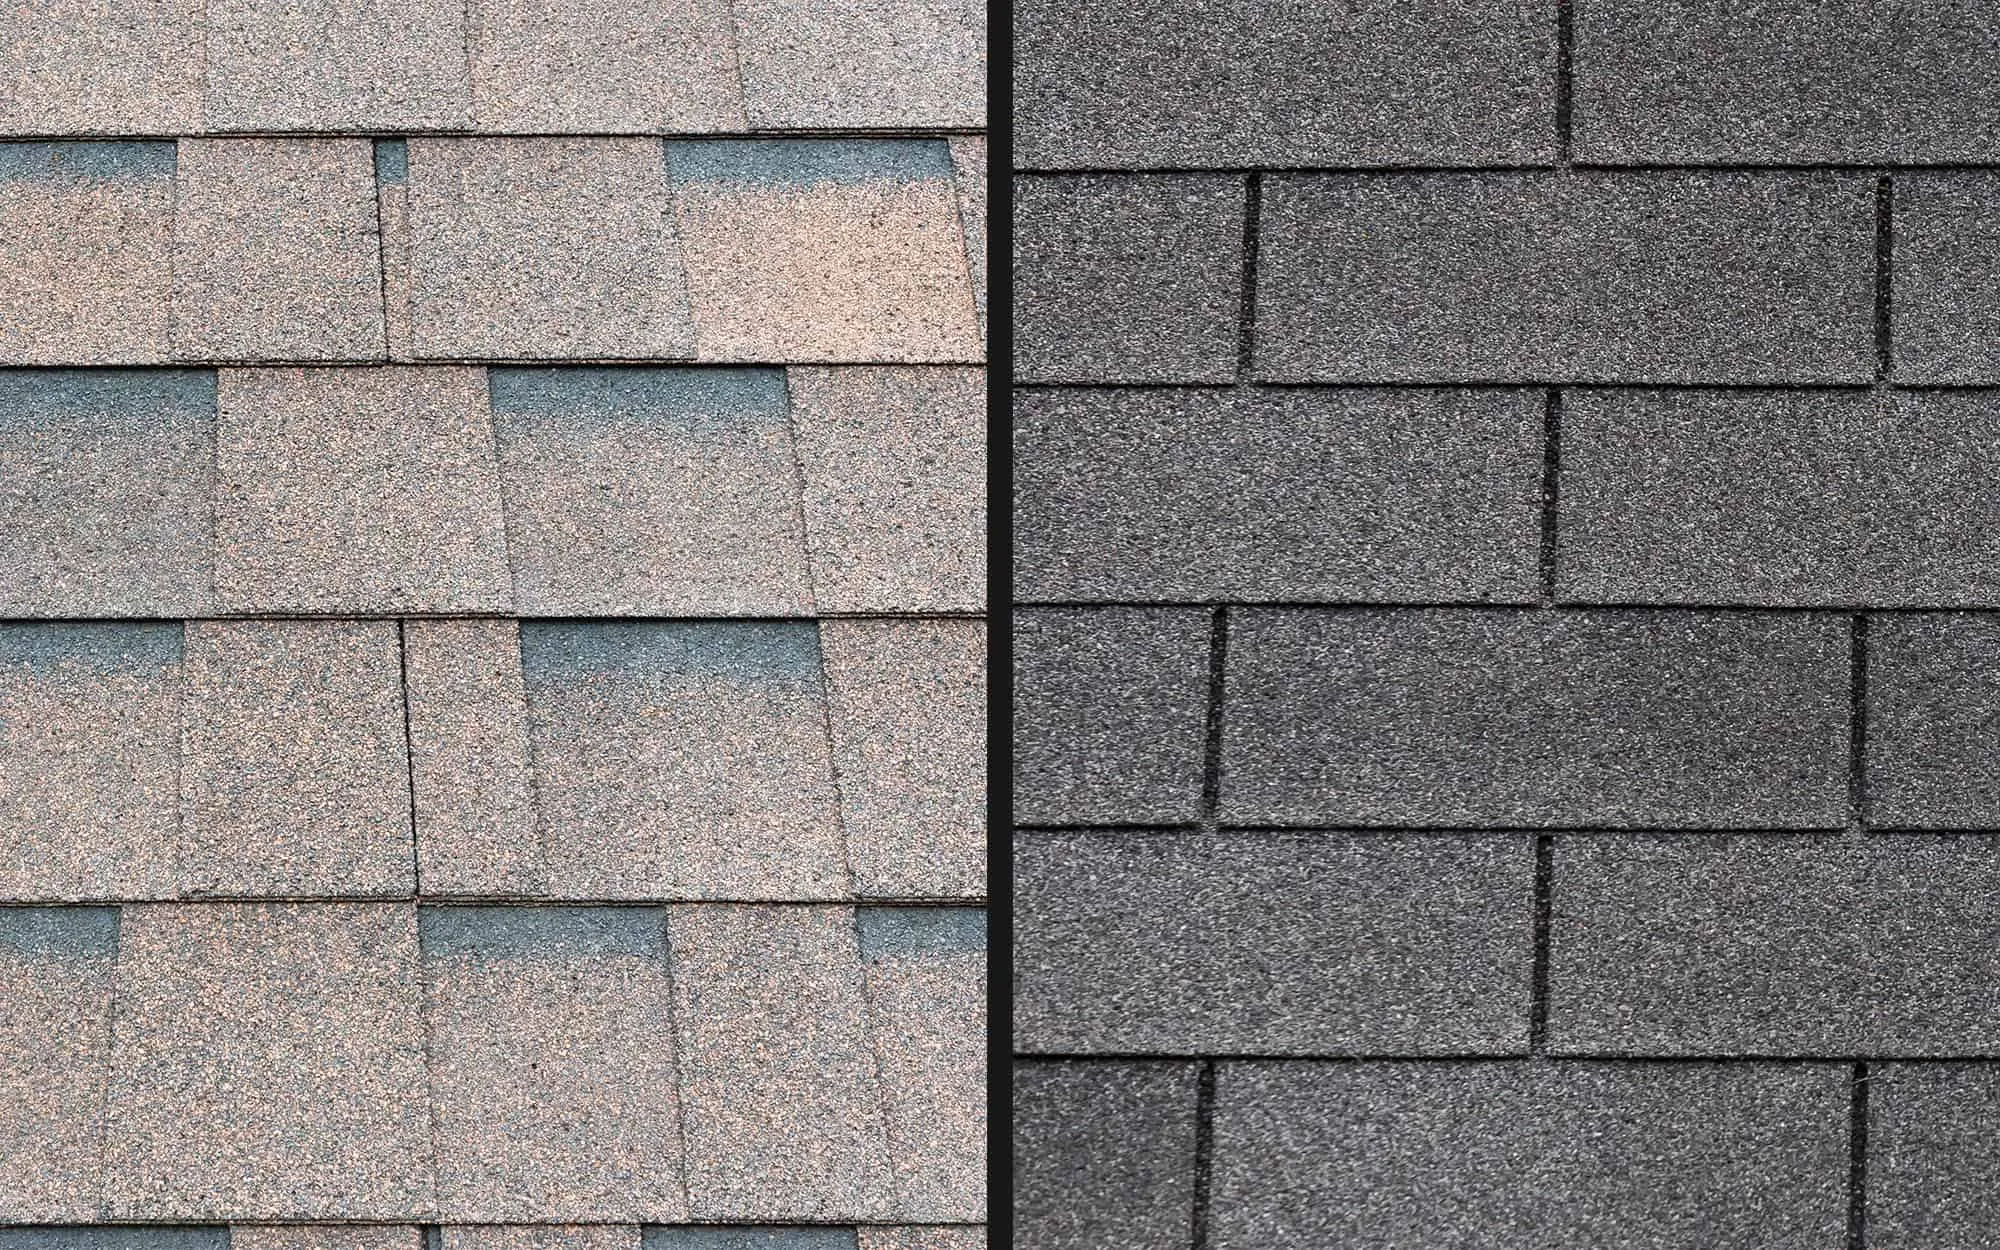 Asphalt and Architectural Shingles